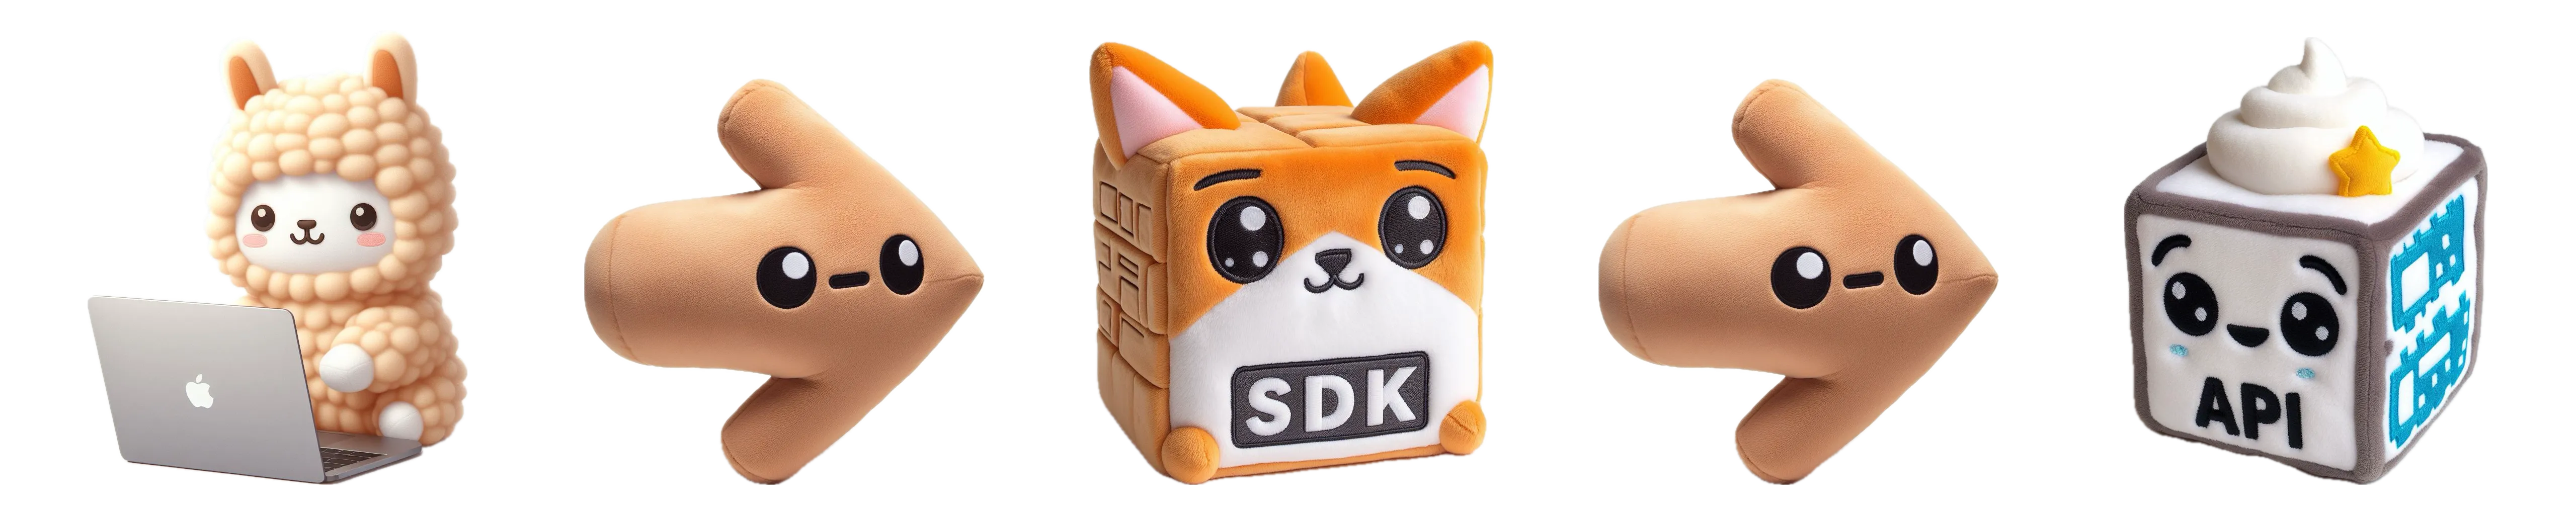 A block diagram of code calling an SDK that calls an API. The code is represented by a plushie llama using a laptop, the arrows between blocks are plushie brown arrows with a neutral facial expression. The SDK is a plushie block fox with SDK written on it, and the API is a plushie block with API written on it, a smiley face, and a swirl of cream on top.